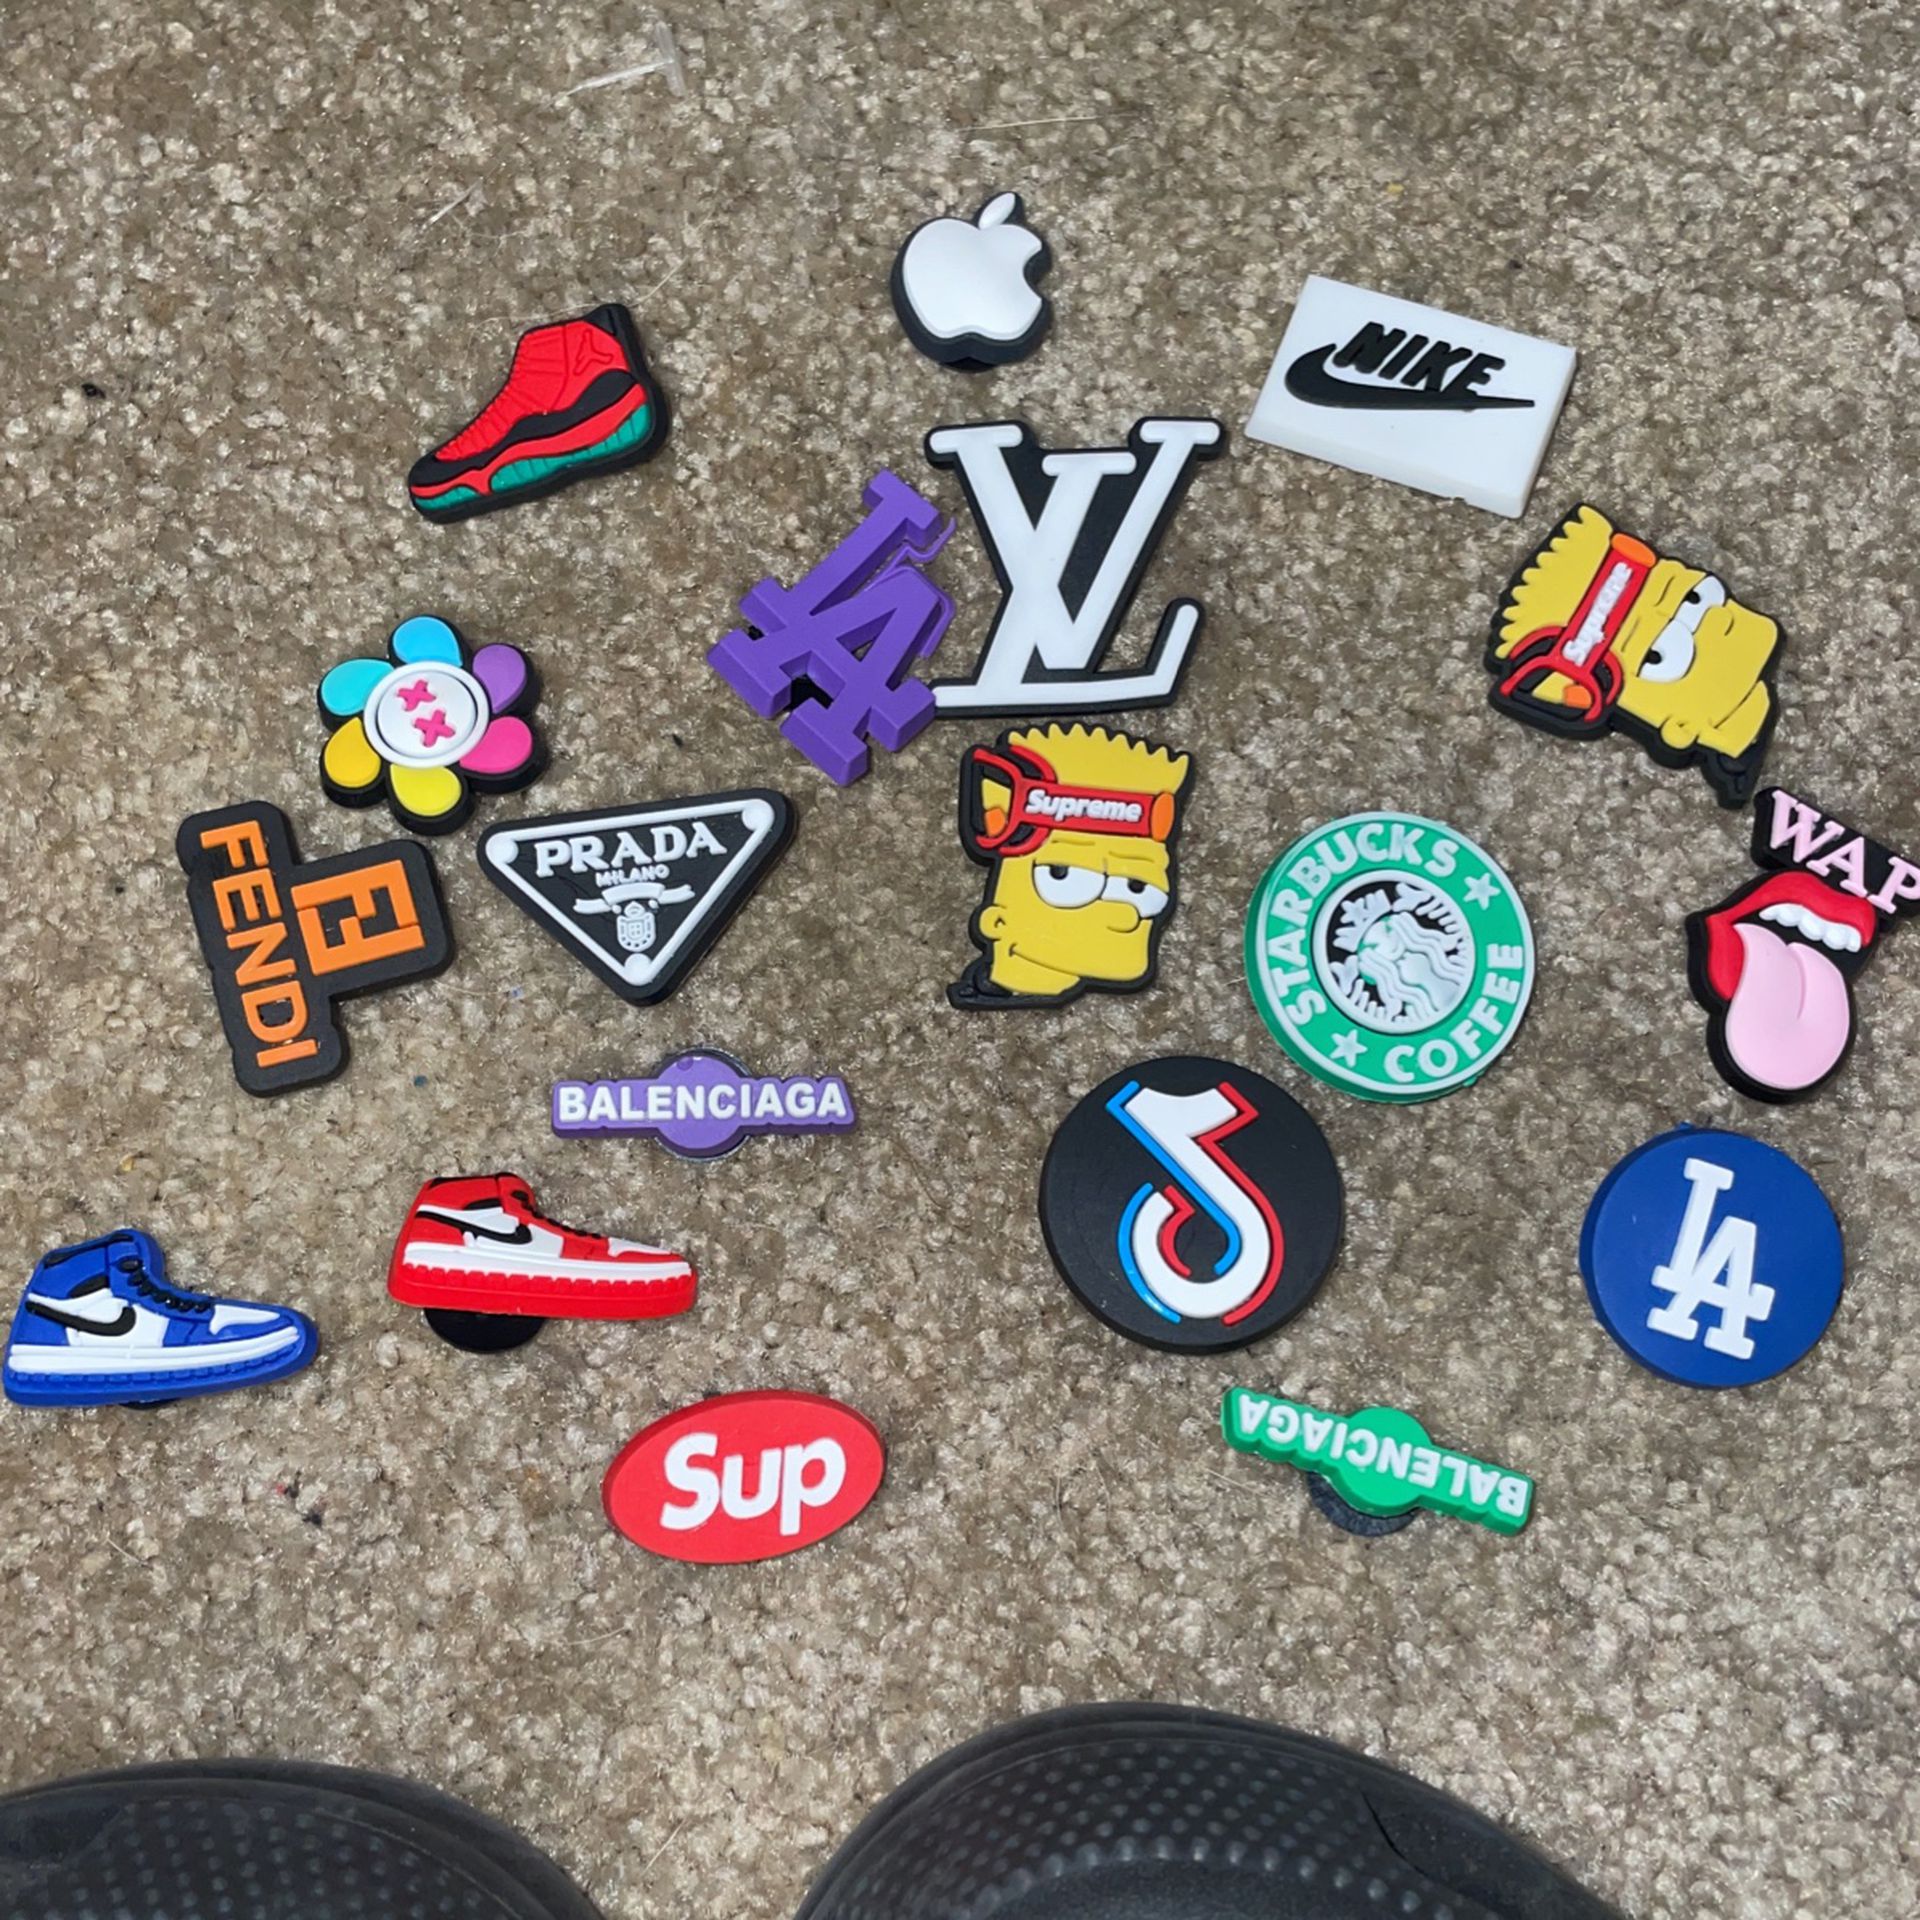 8 Piece Designer Croc Charms Nike/GG/CC/Dior And More for Sale in Newport  Beach, CA - OfferUp